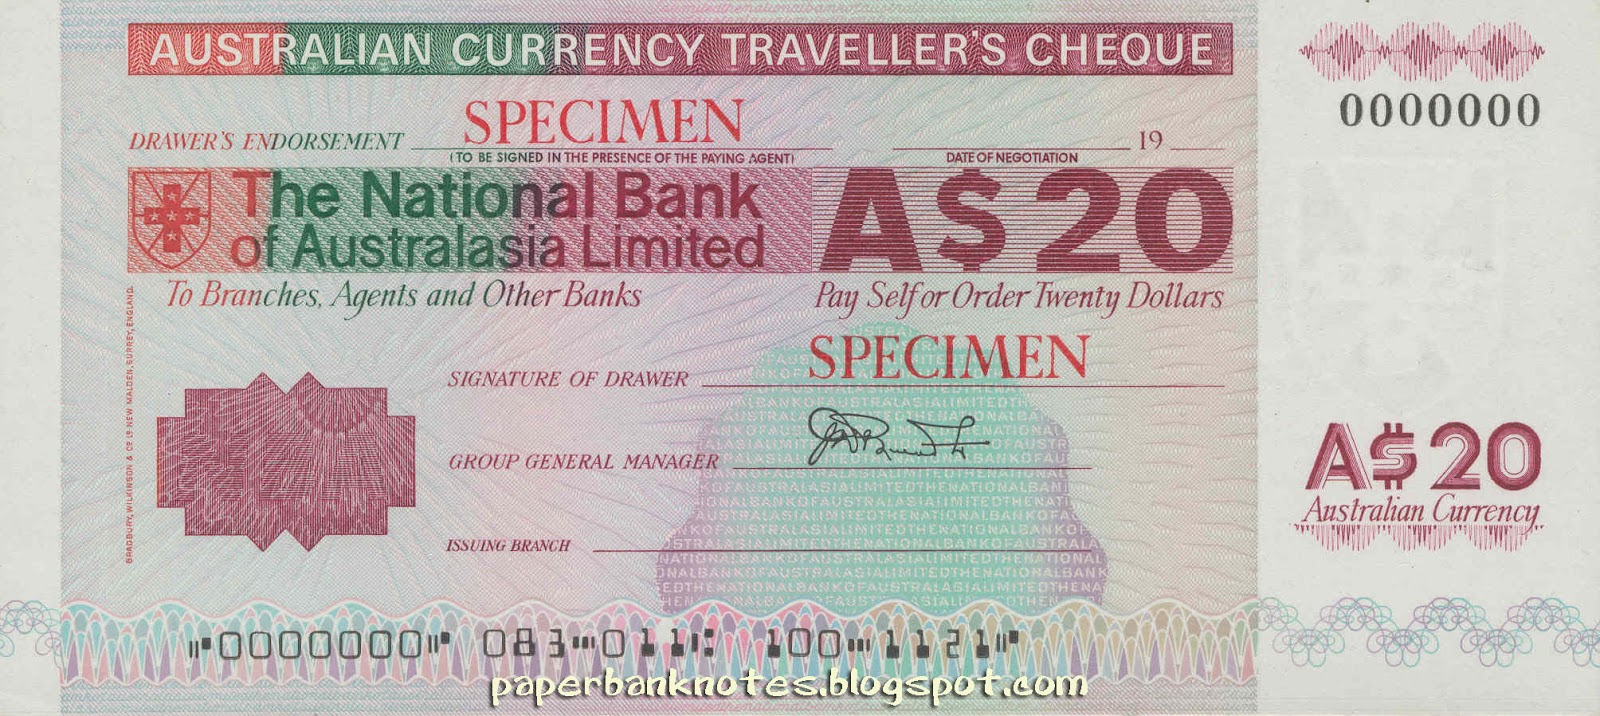 where can i cash travellers cheques in australia